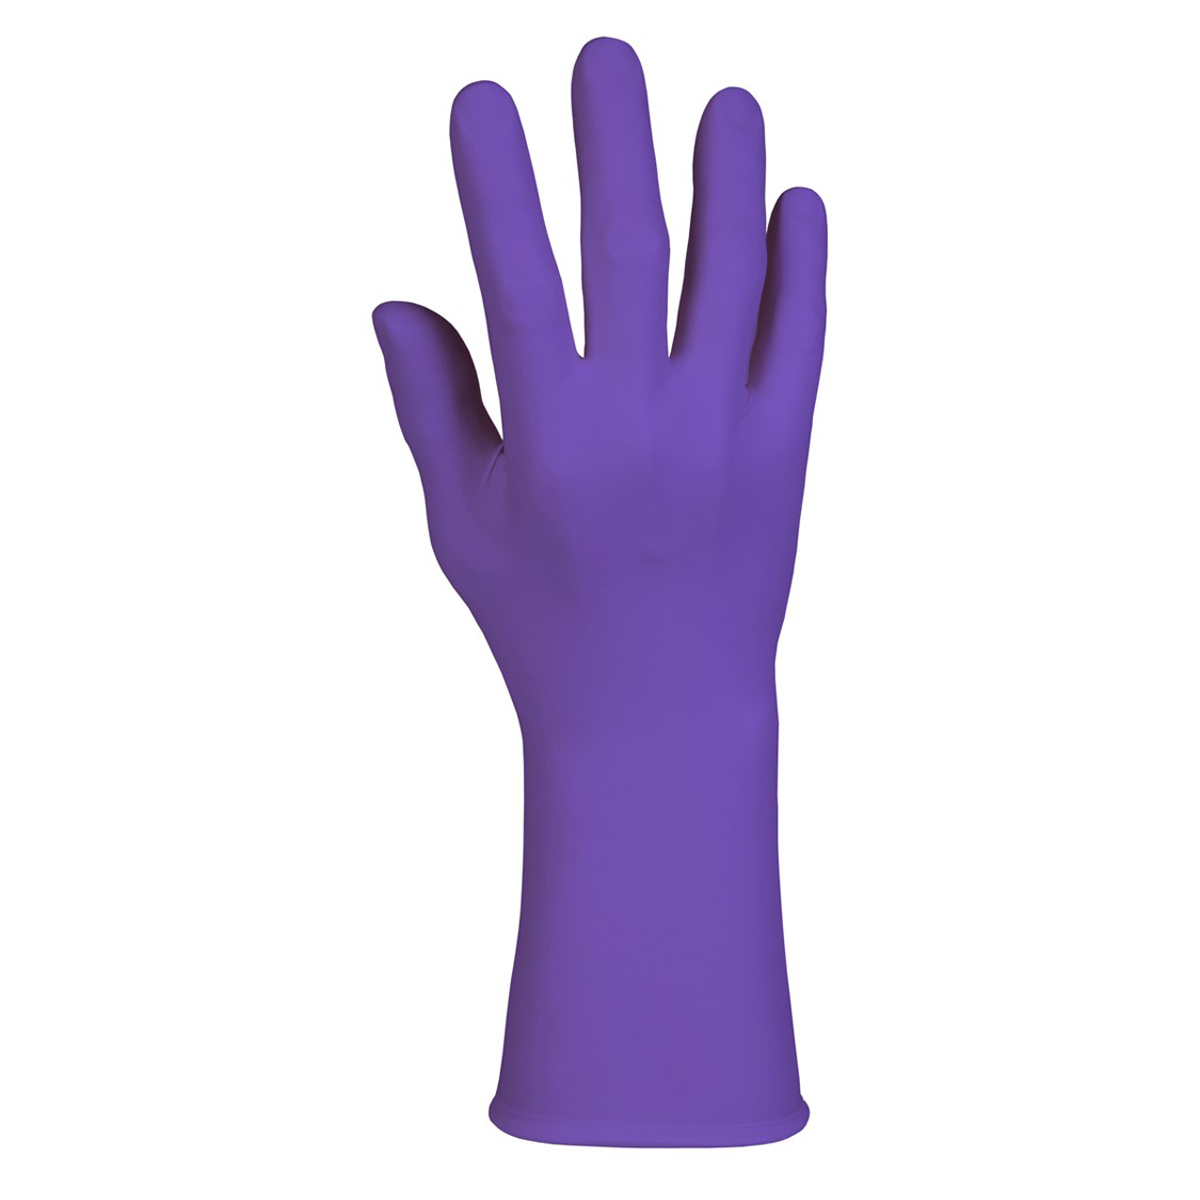 Kimberly-Clark Professional* X-Large Purple Nitrile-Xtra* 6 mil Nitrile Disposable Exam Gloves (50 Gloves Per Box) (Availability